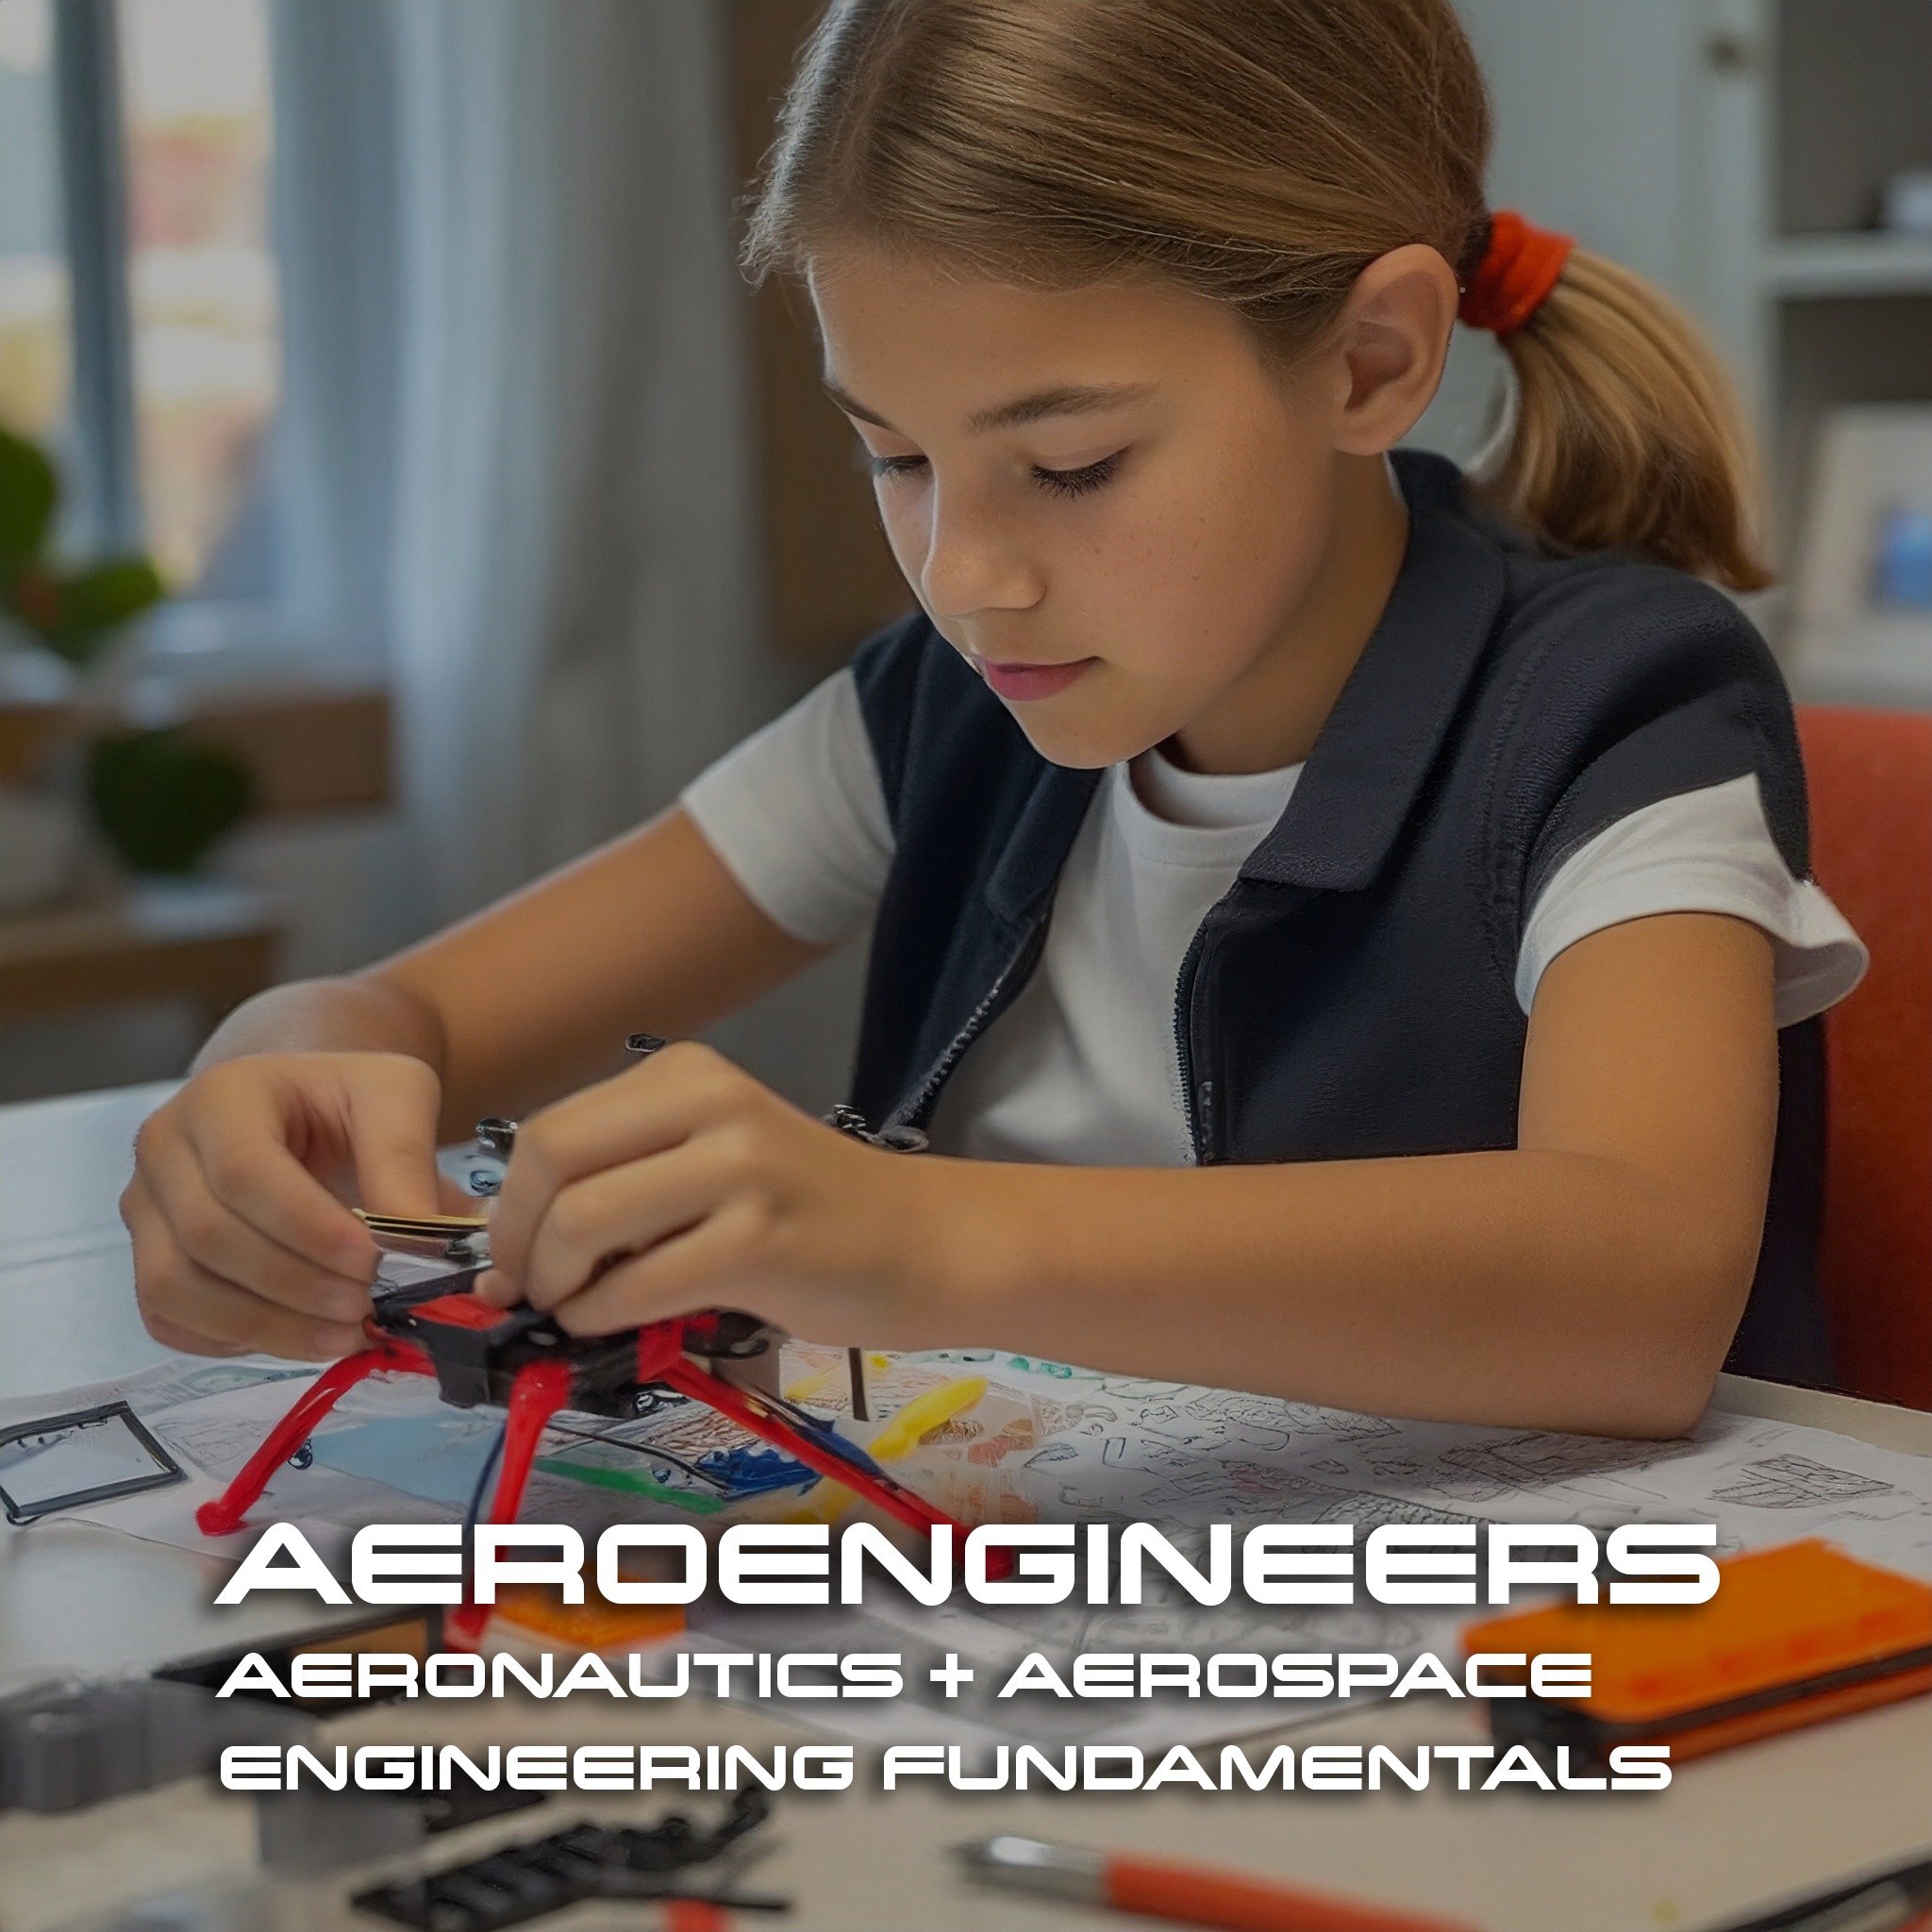 ✈️ Take flight with us this May! 🚀

The STEM Academy's AeroEngineers module is tailored for aspiring young engineers ages 9-14. This dynamic program is designed to captivate young minds with the wonders of flight, from the basic principles of aerona